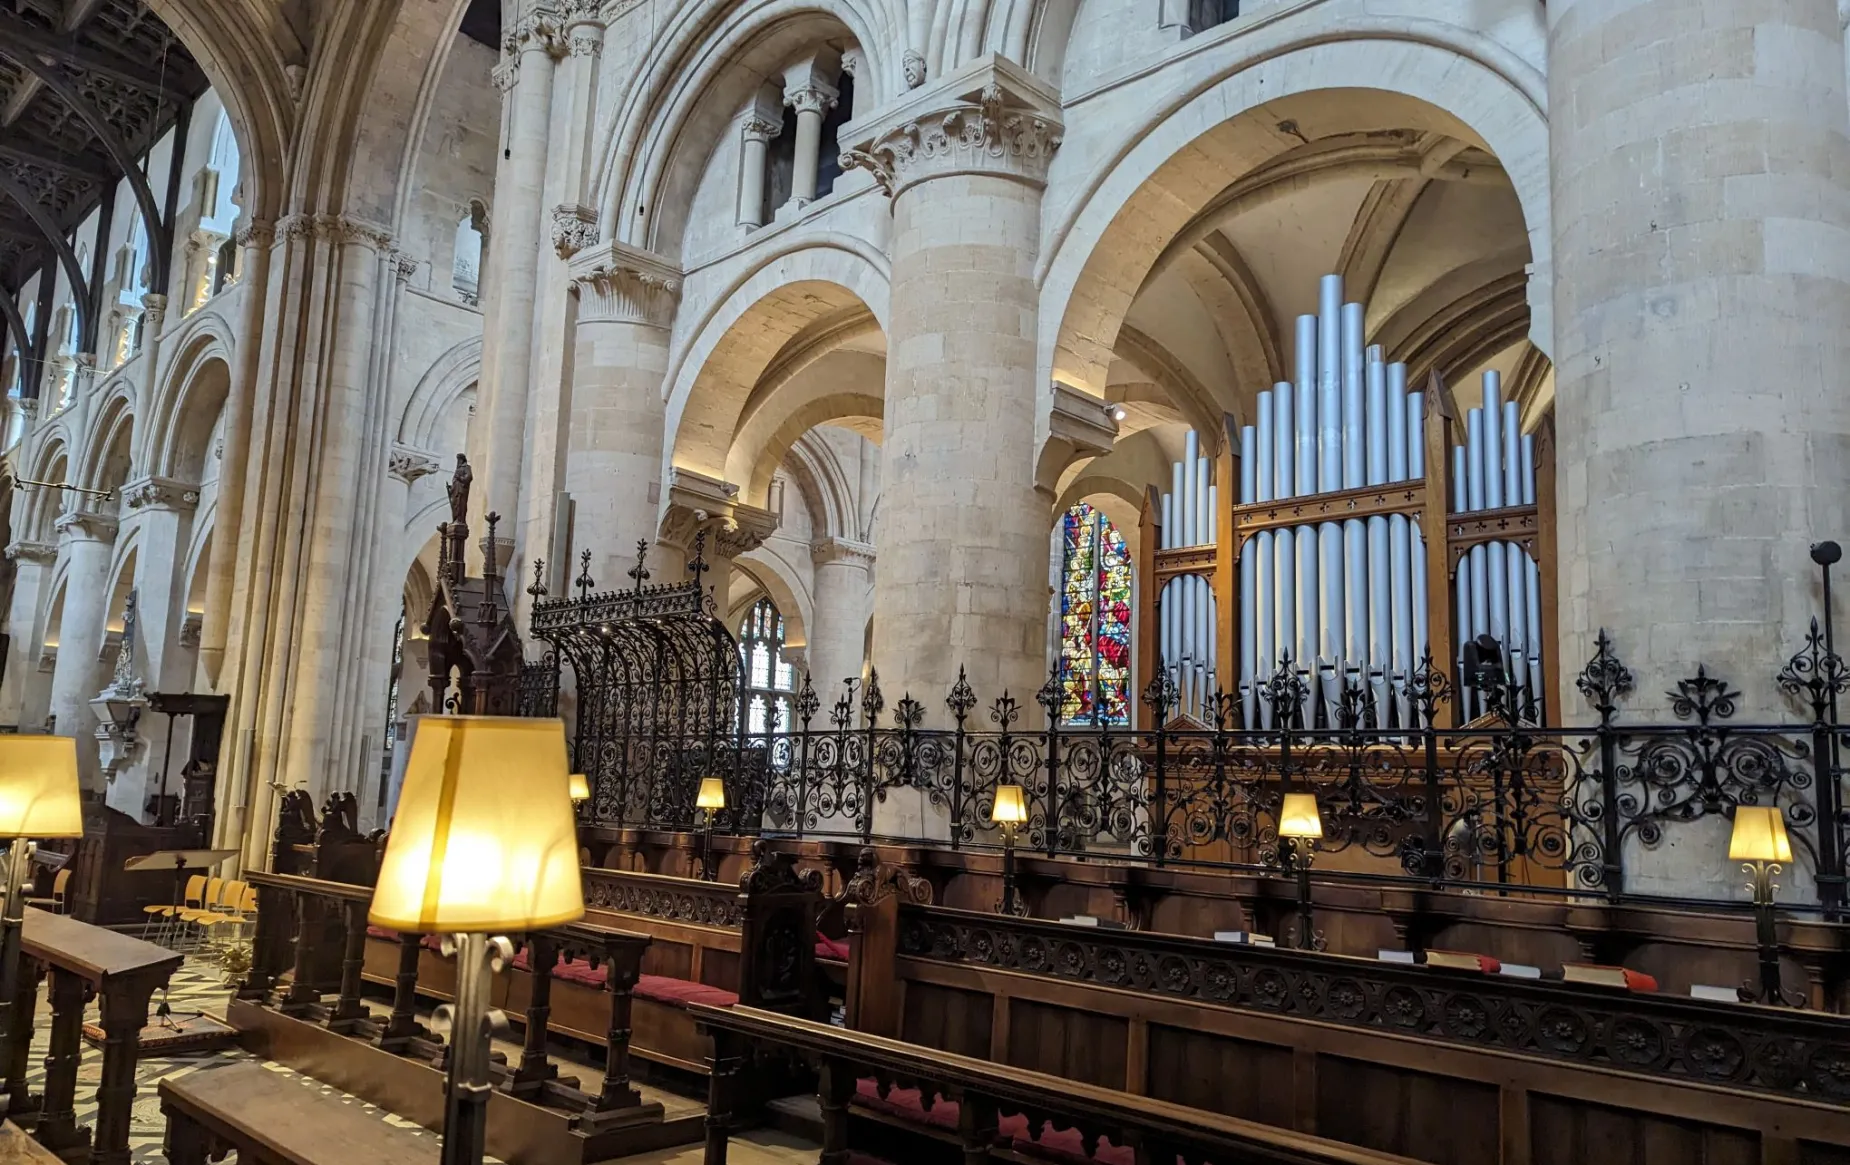 A view of the Chancel, with the former chancel organ visible under the arches